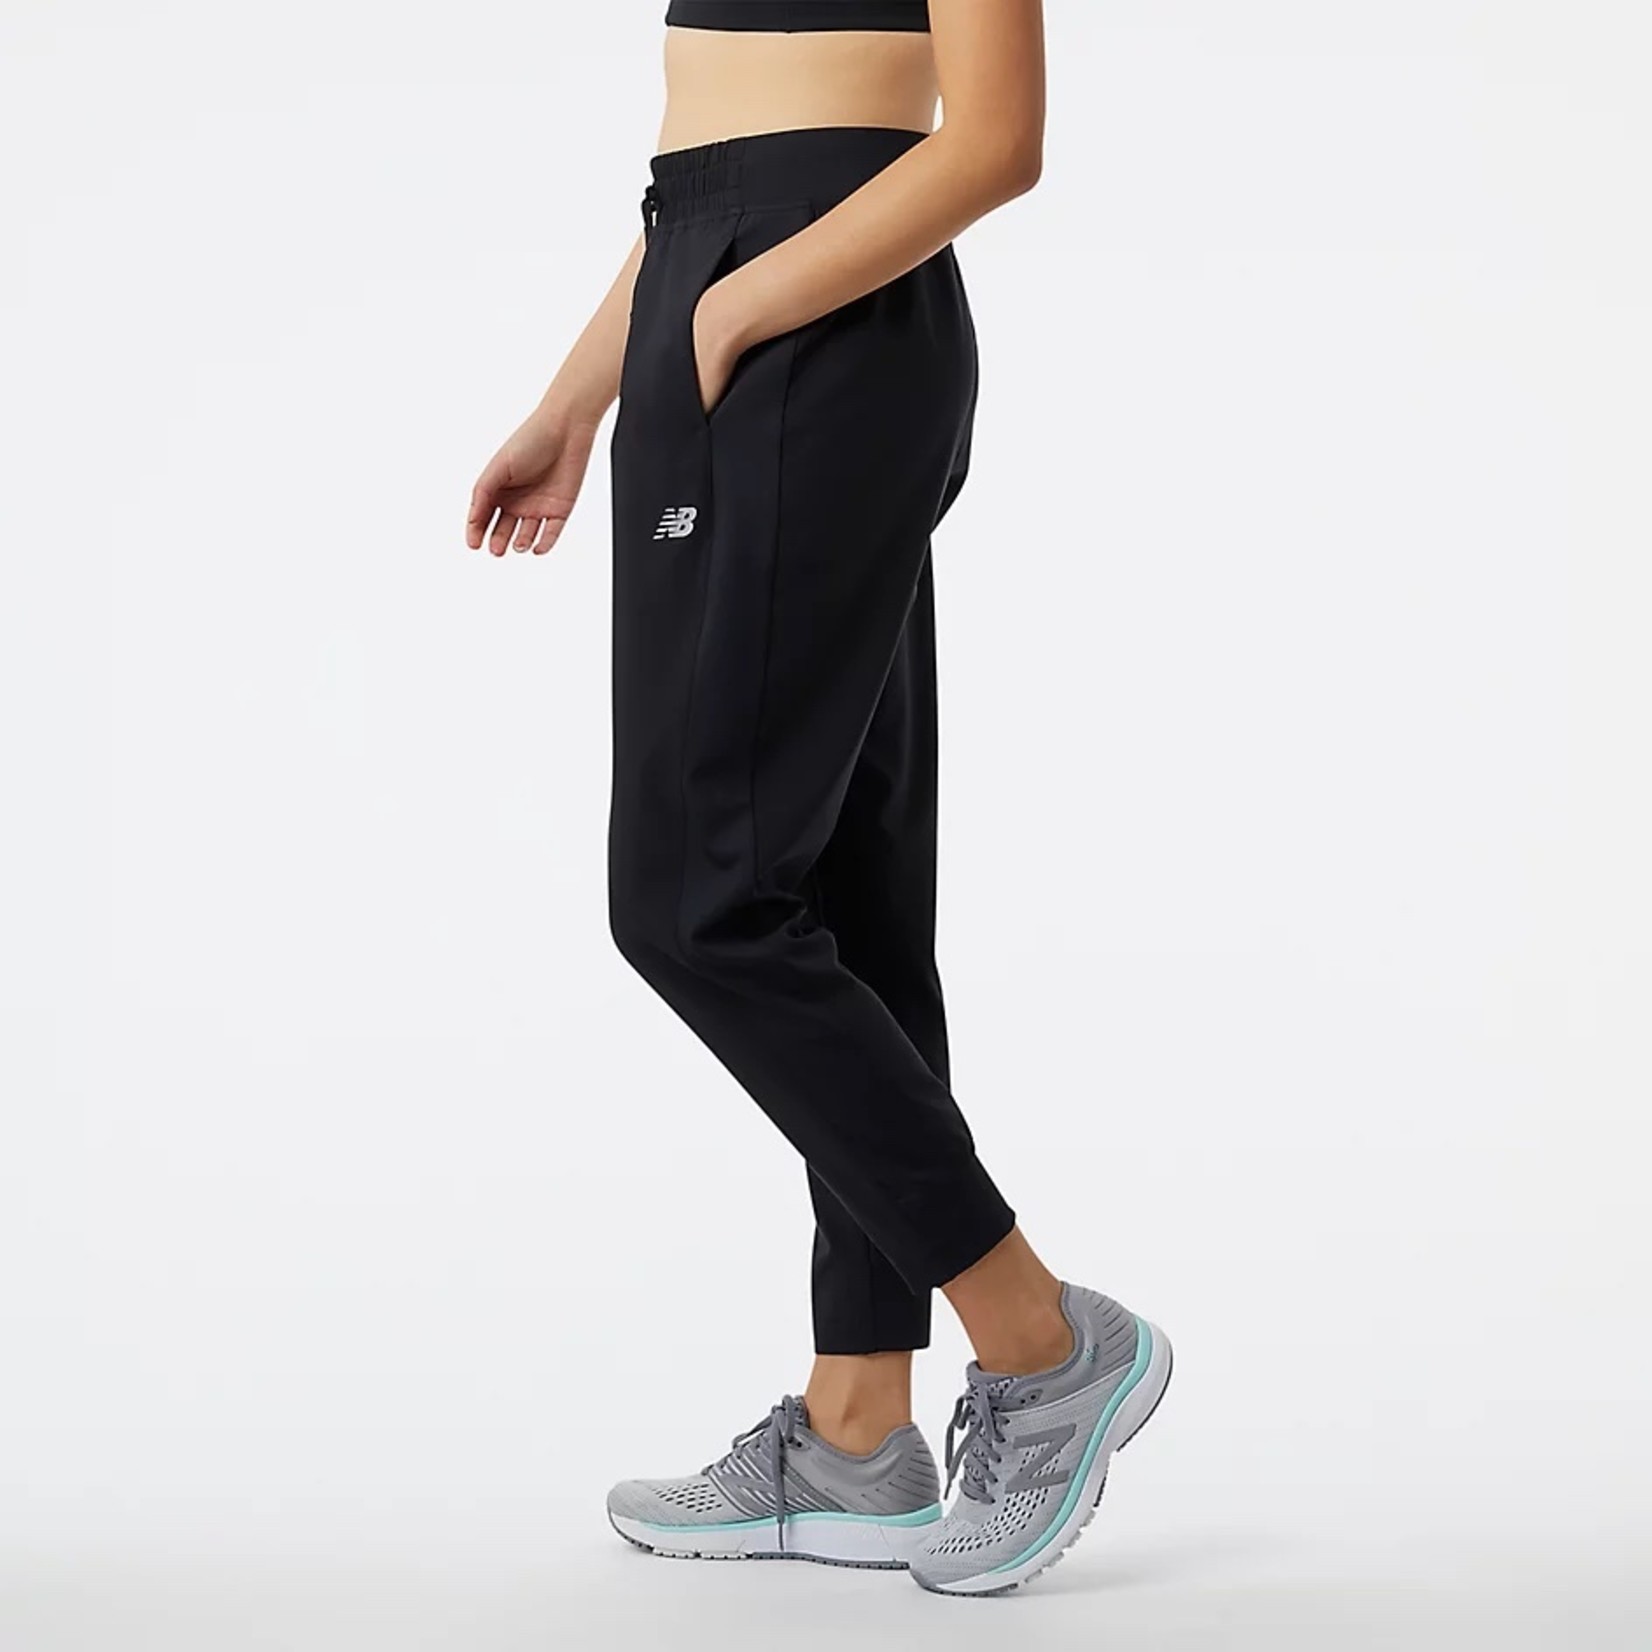 New Balance Accelerate Tight - Running Tights Women's, Buy online